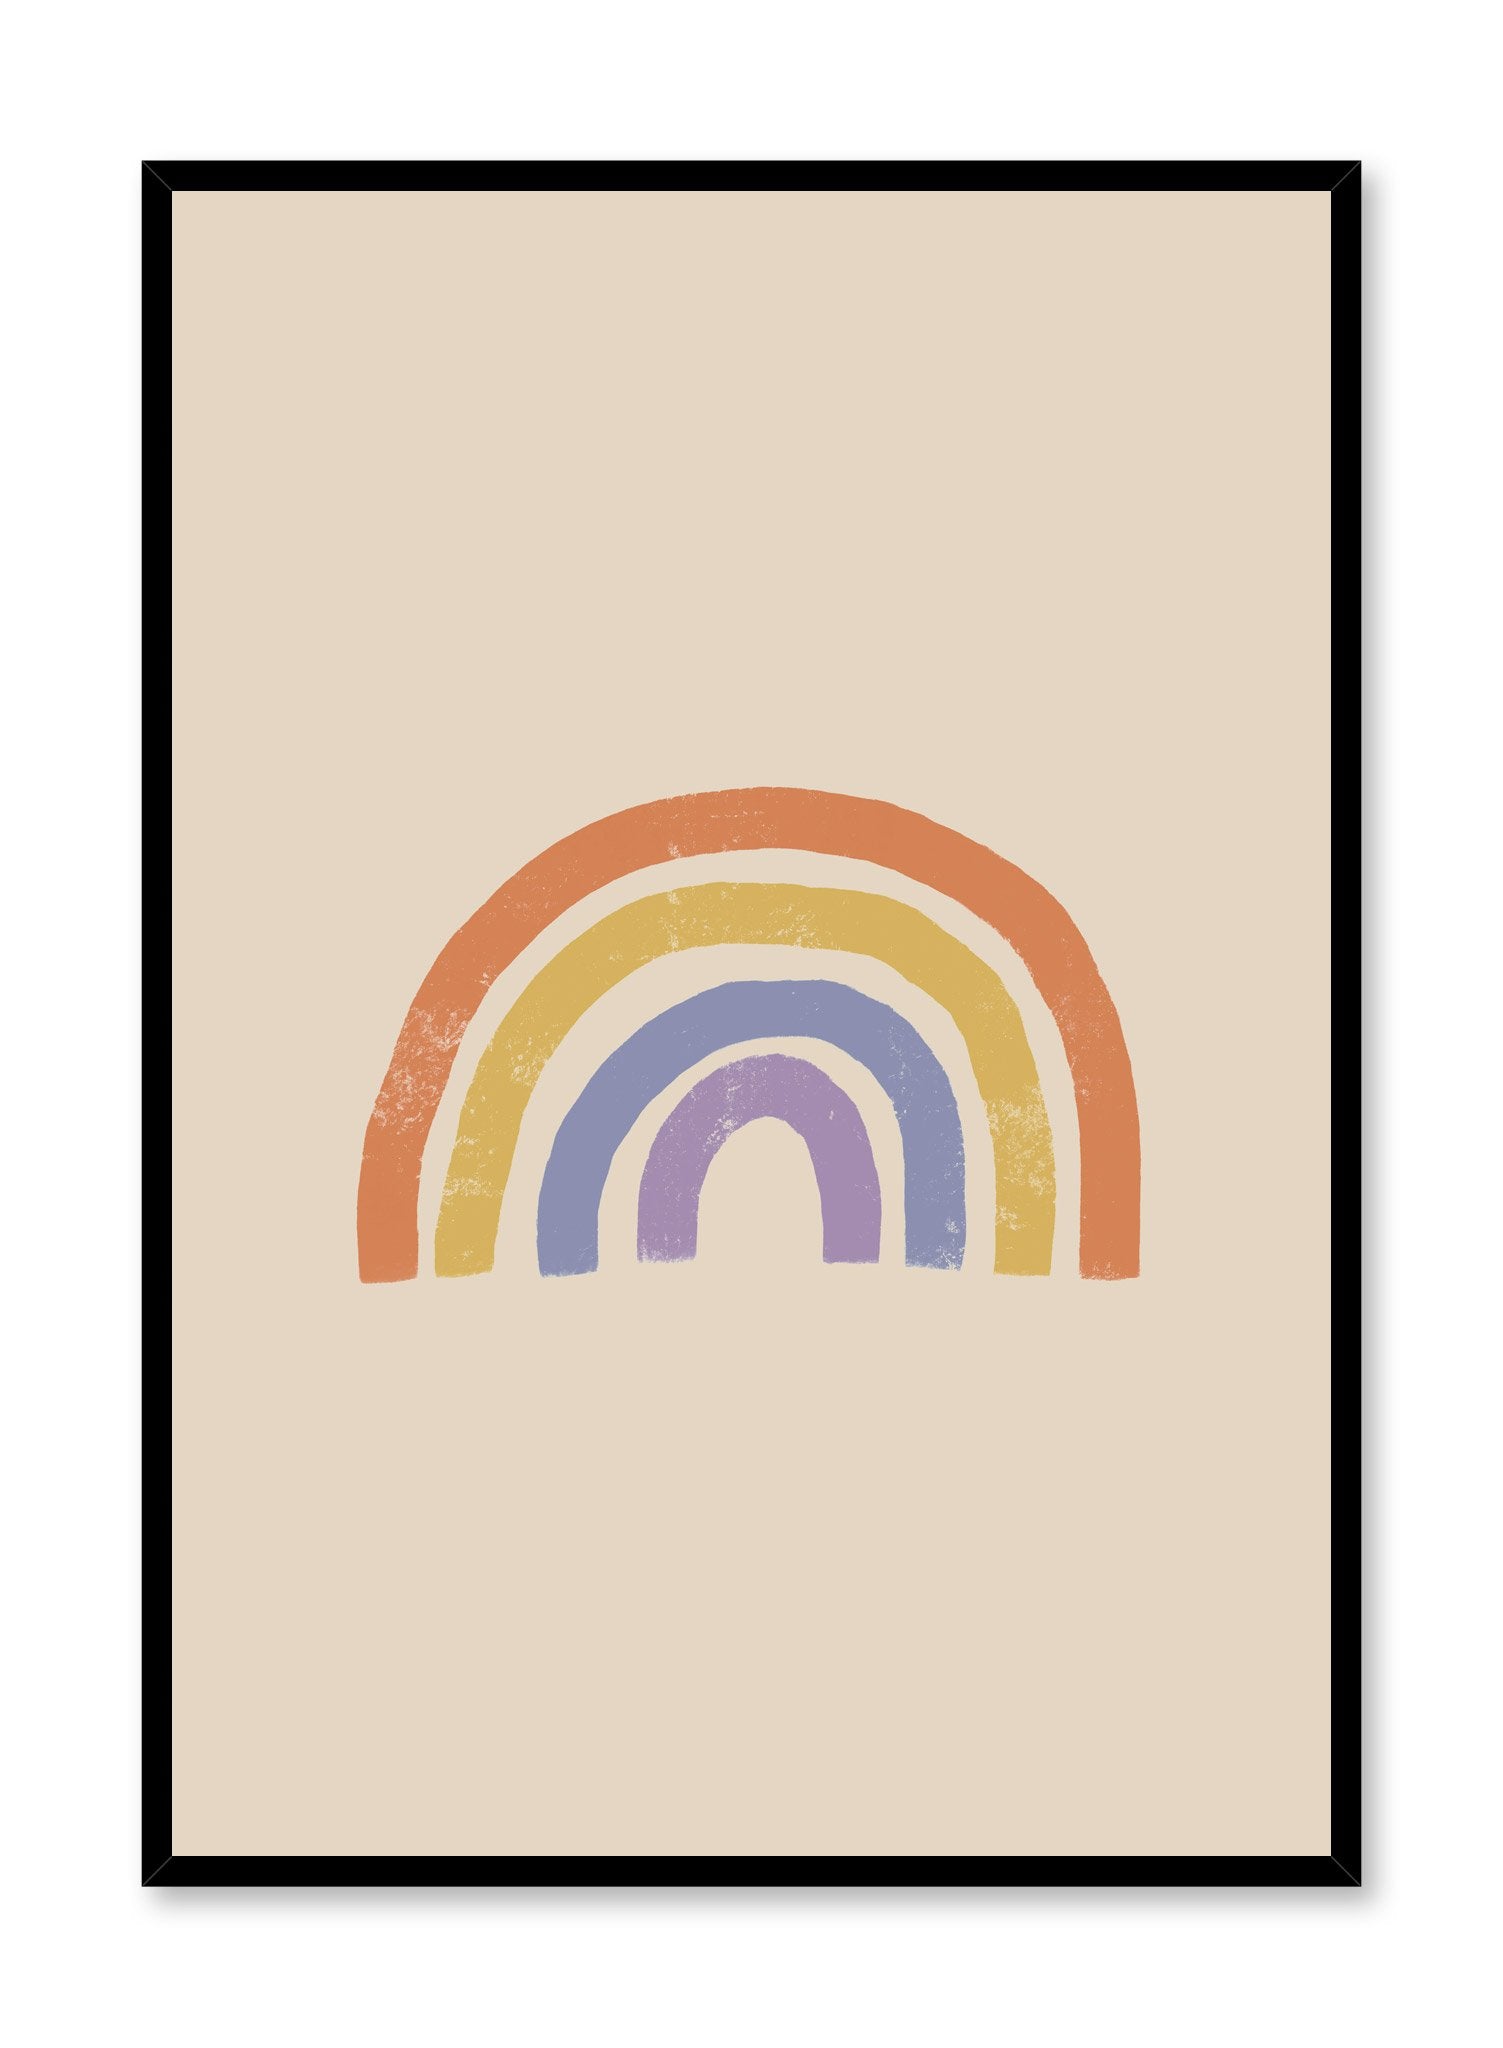 Modern minimalist poster by Opposite Wall with abstract design of Rainbow